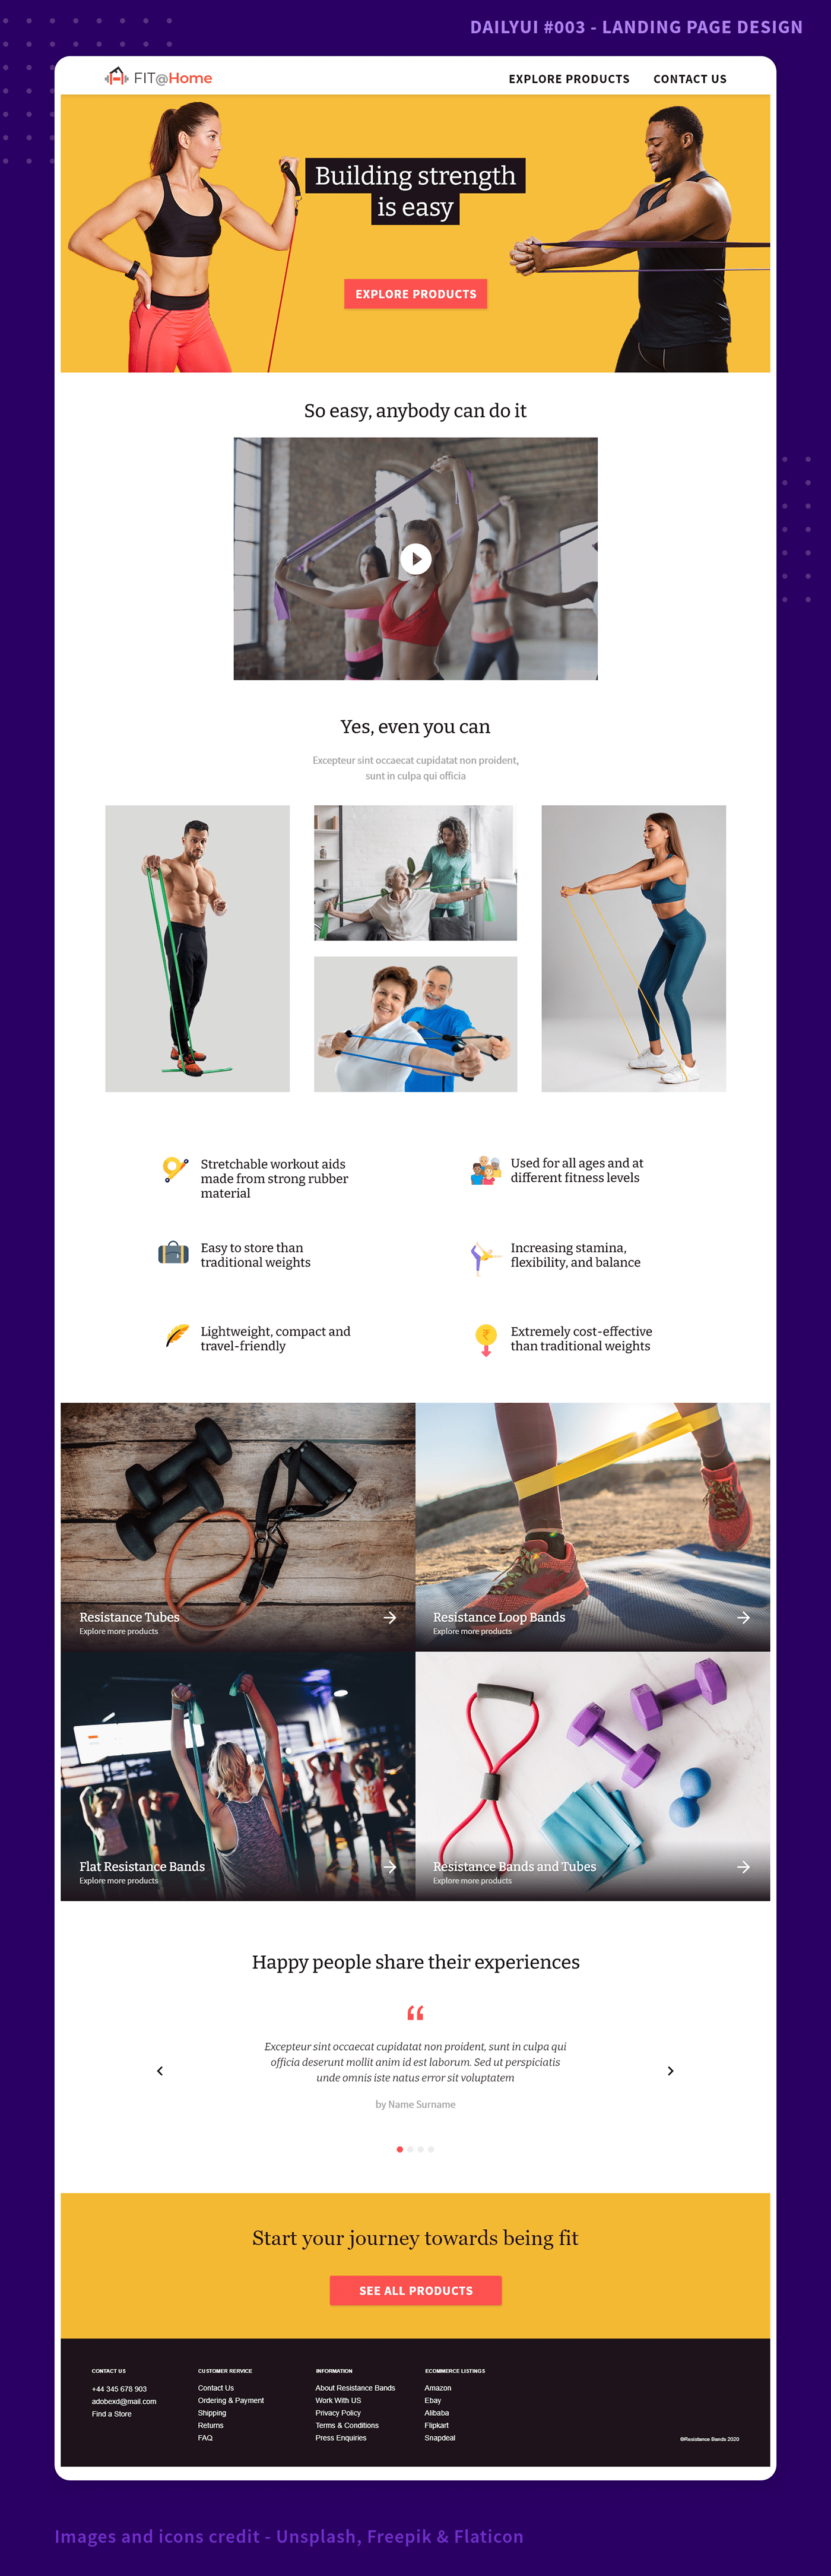 Landing Page Design for fitness equipment company.